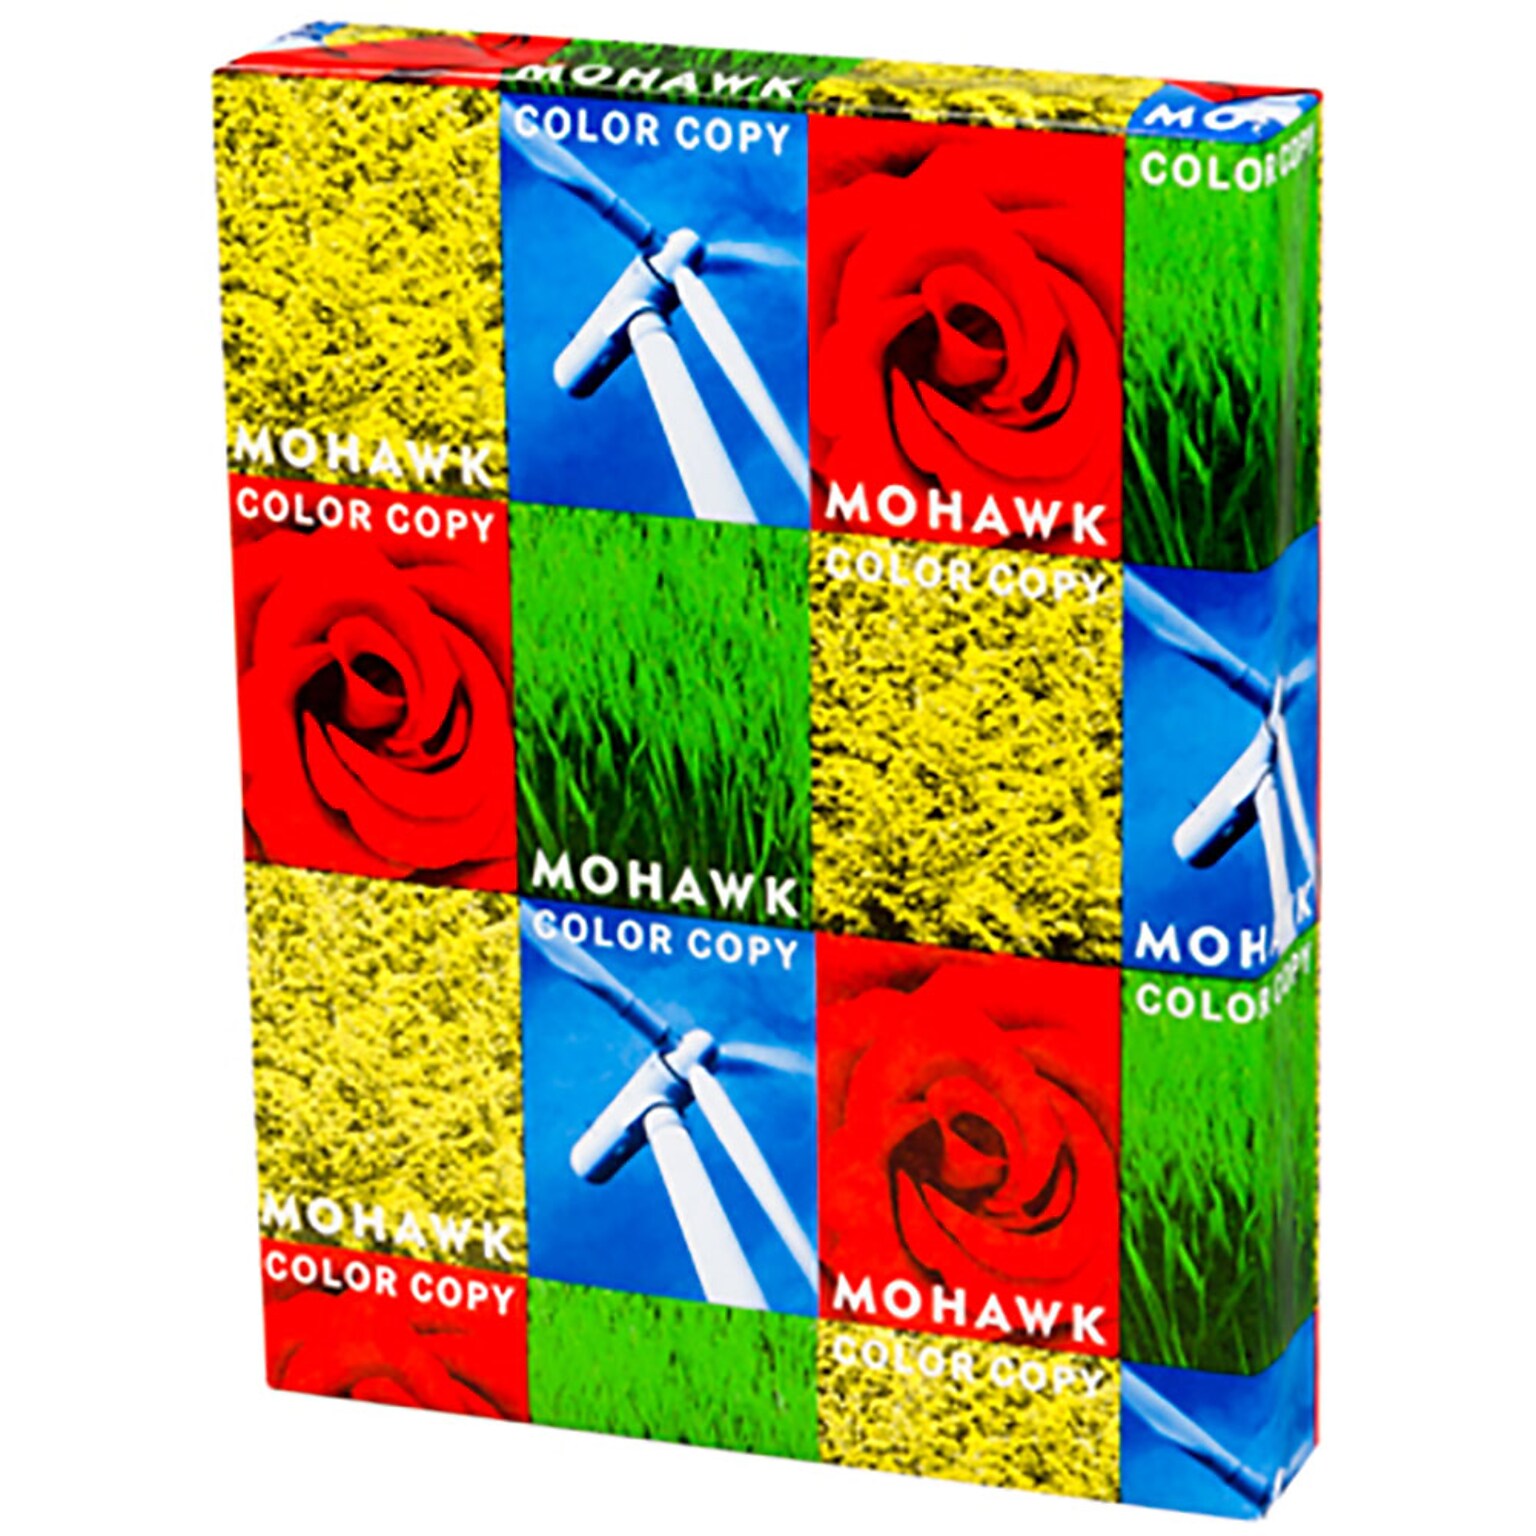 Mohawk® Color Copy 98 11 x 17 Smooth Imaging Paper, 28 lbs., 98 Brightness, 500 Sheets/Ream (12-206)